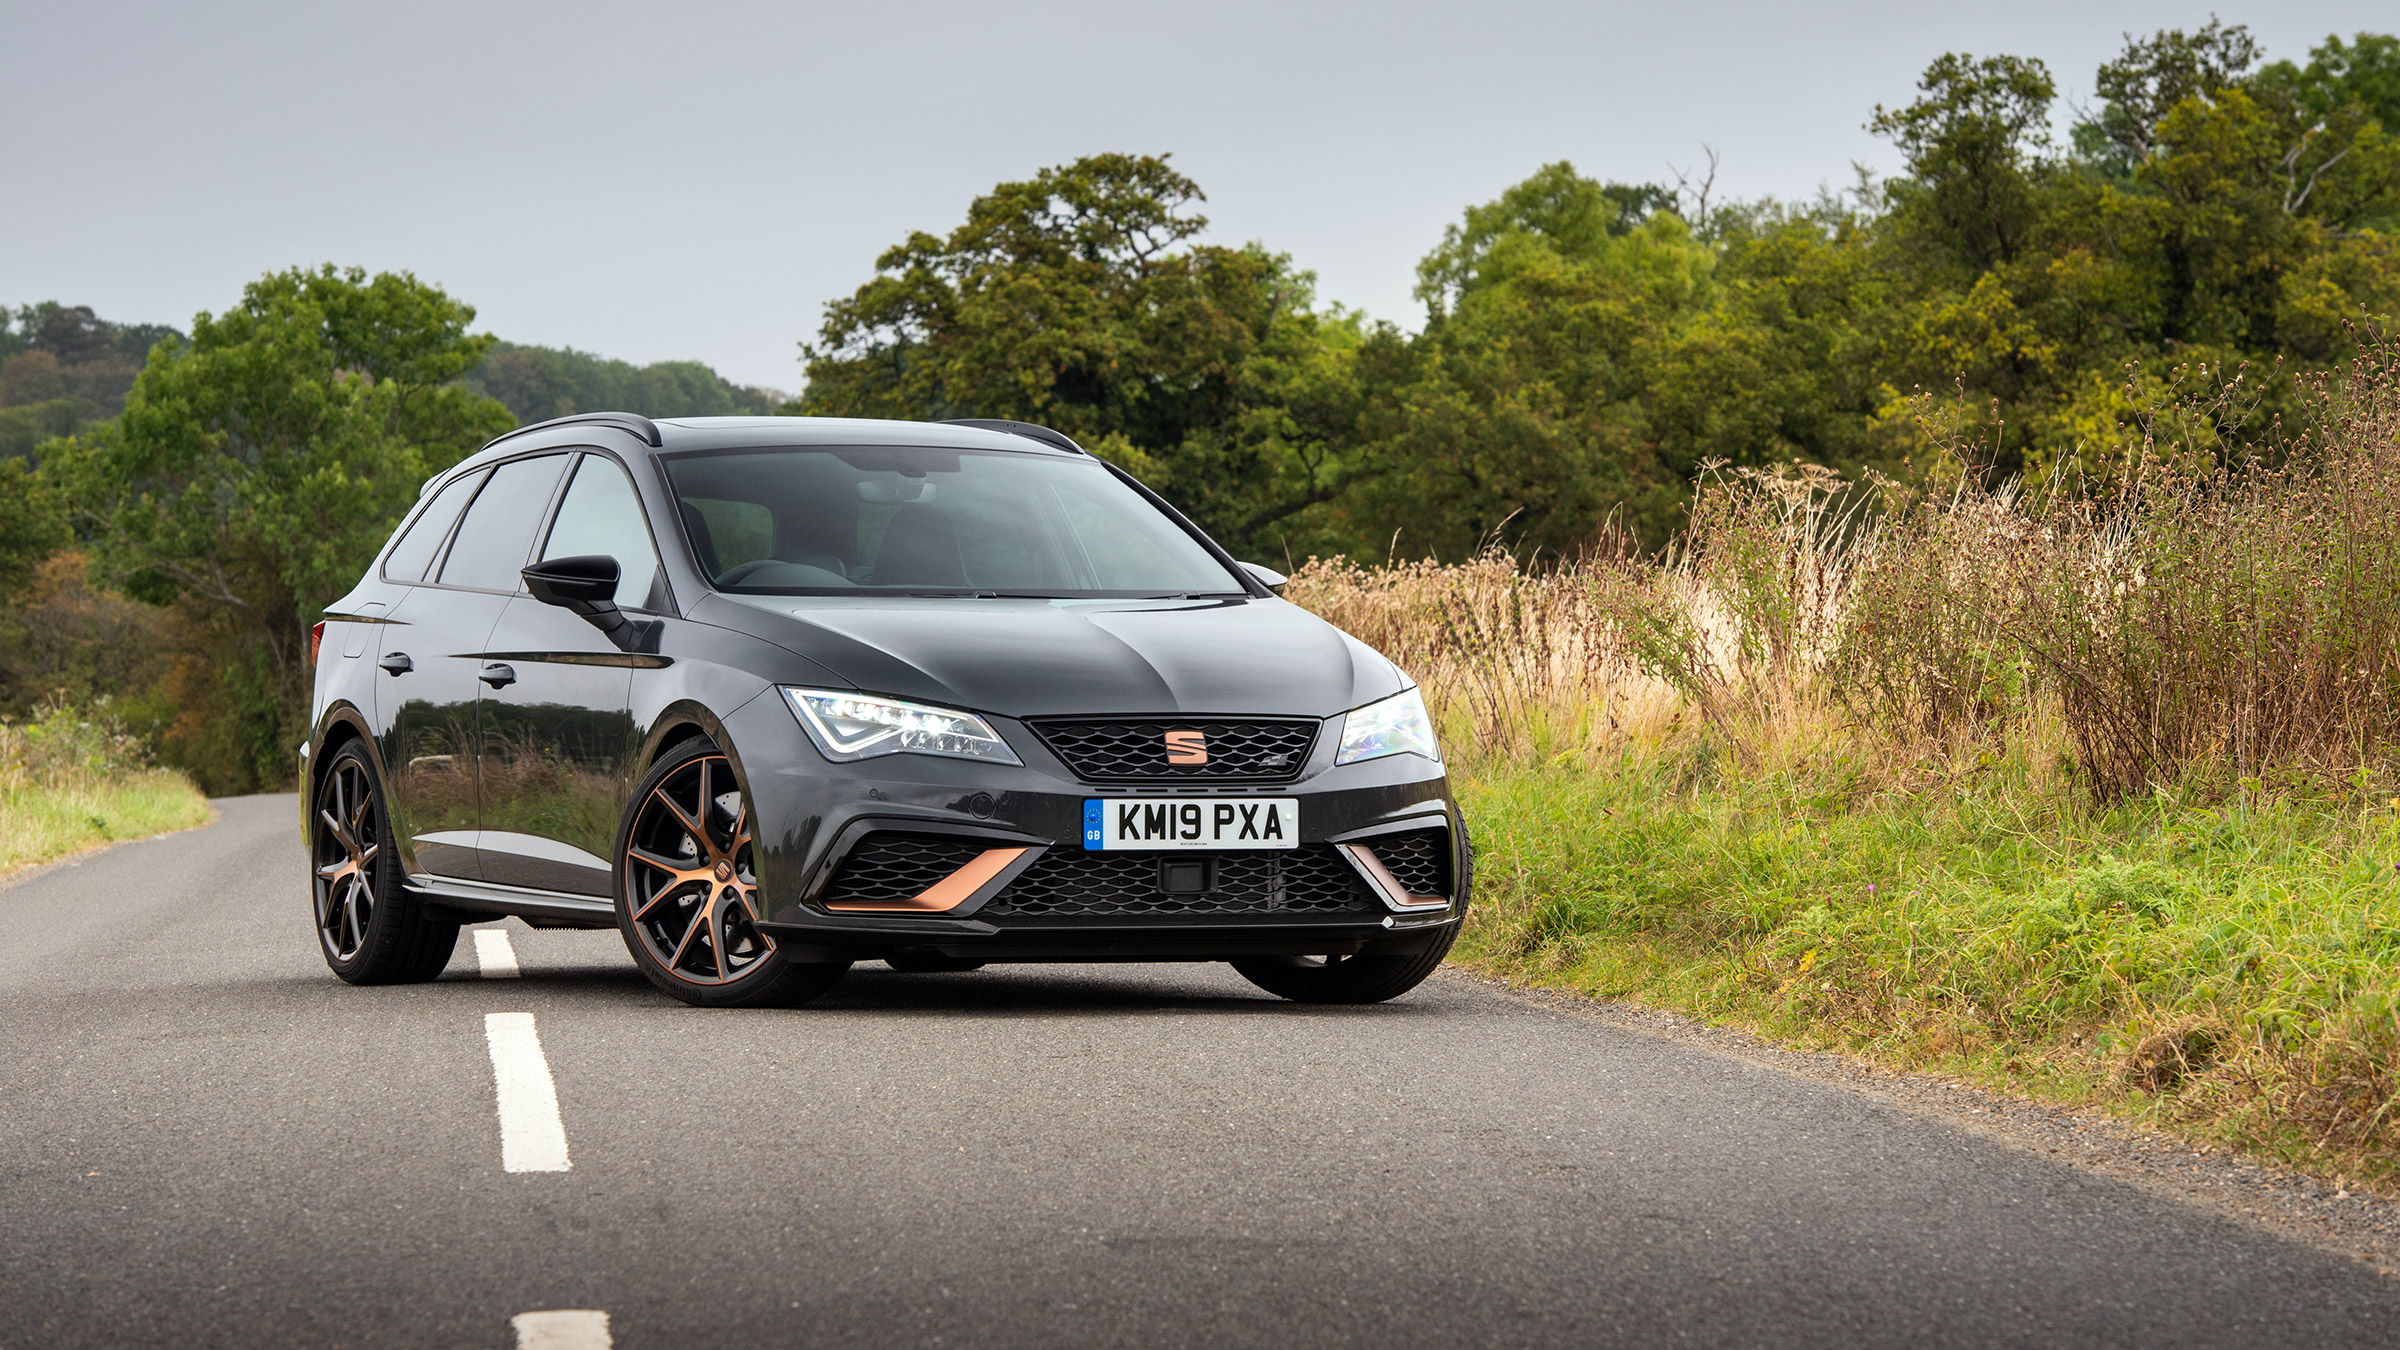 The new Seat Leon Cupra R is here